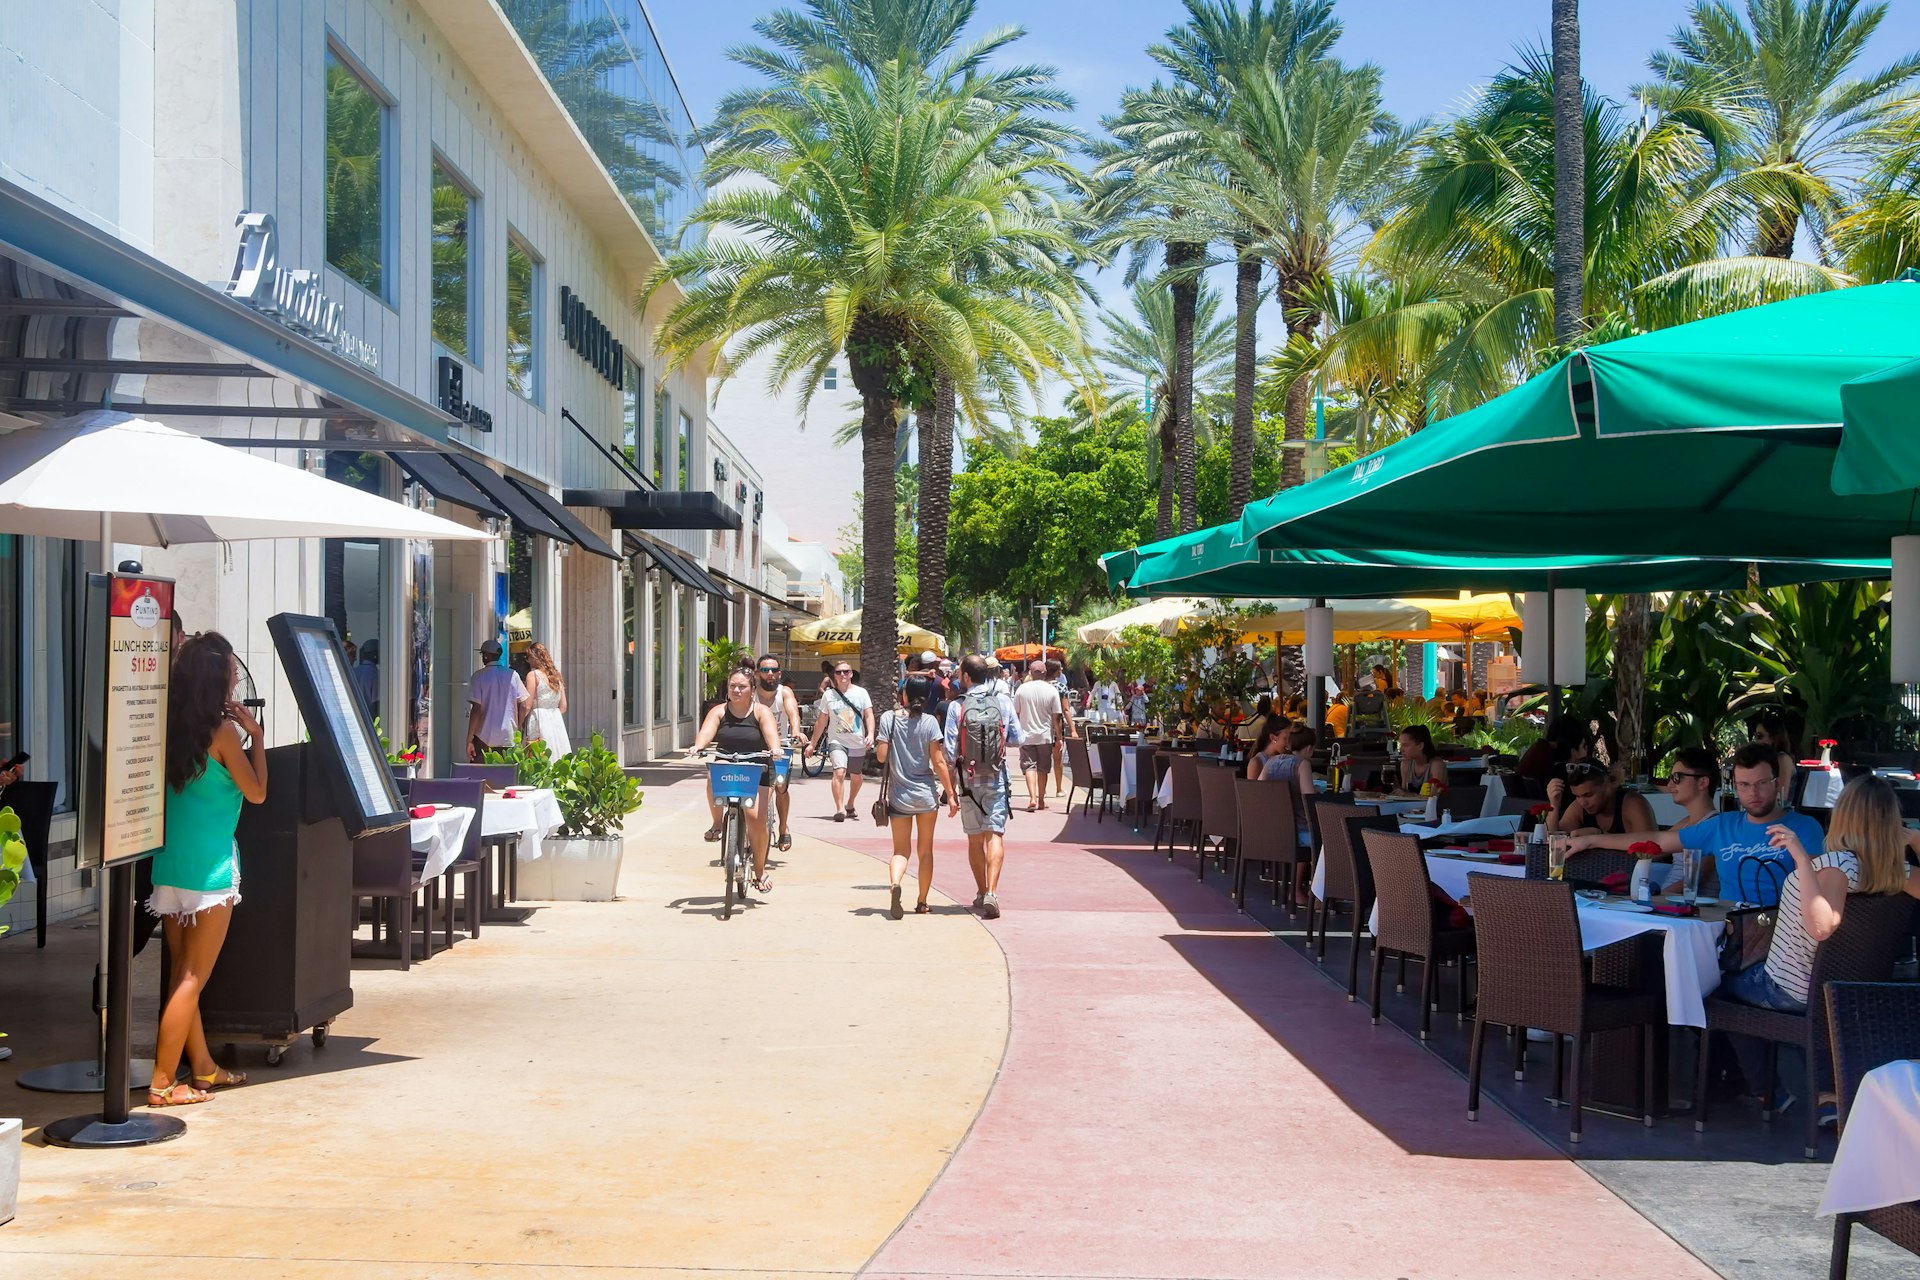 A pedestrianized street lined with restaurant tables